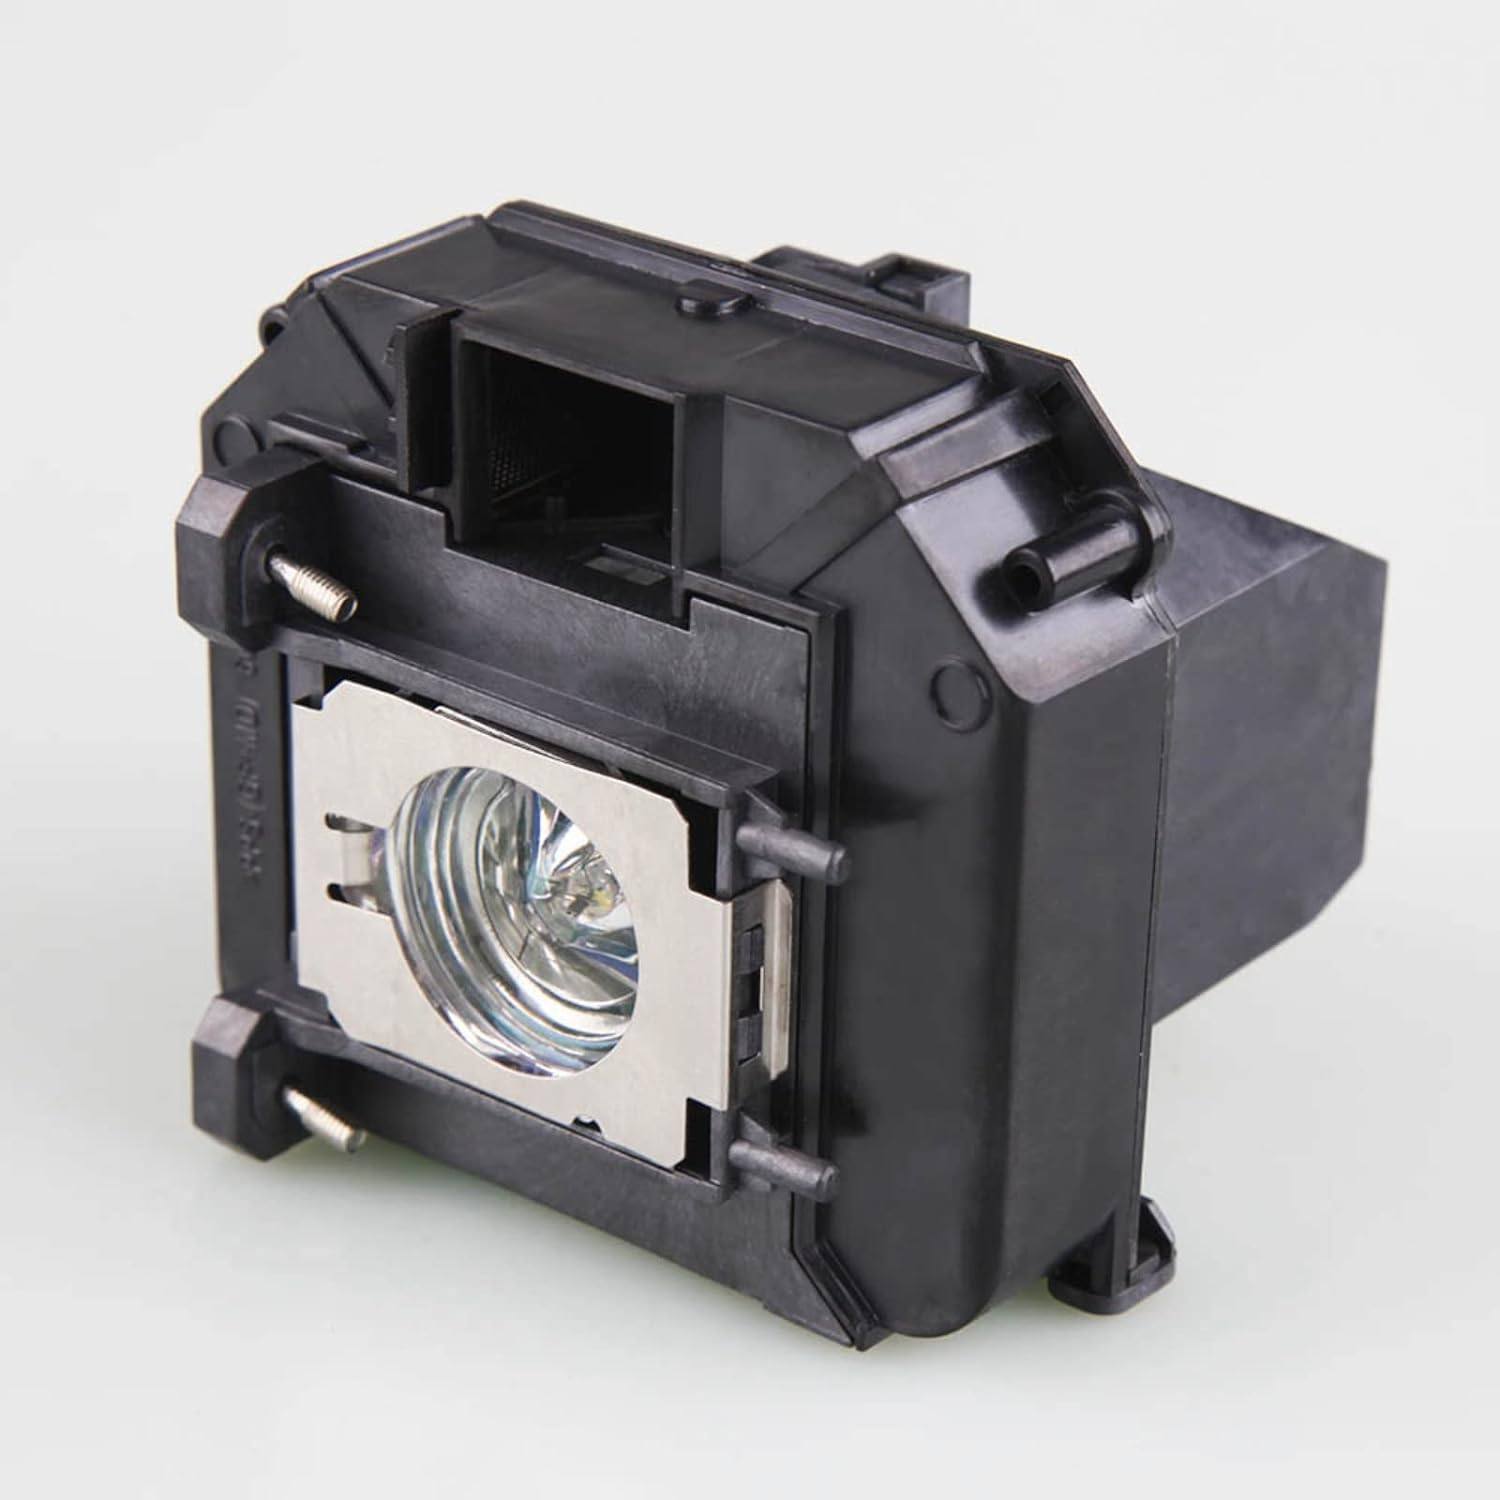 Replacement Original projector lamp ELPLP60 For EPSON EB-2020 EB-2060